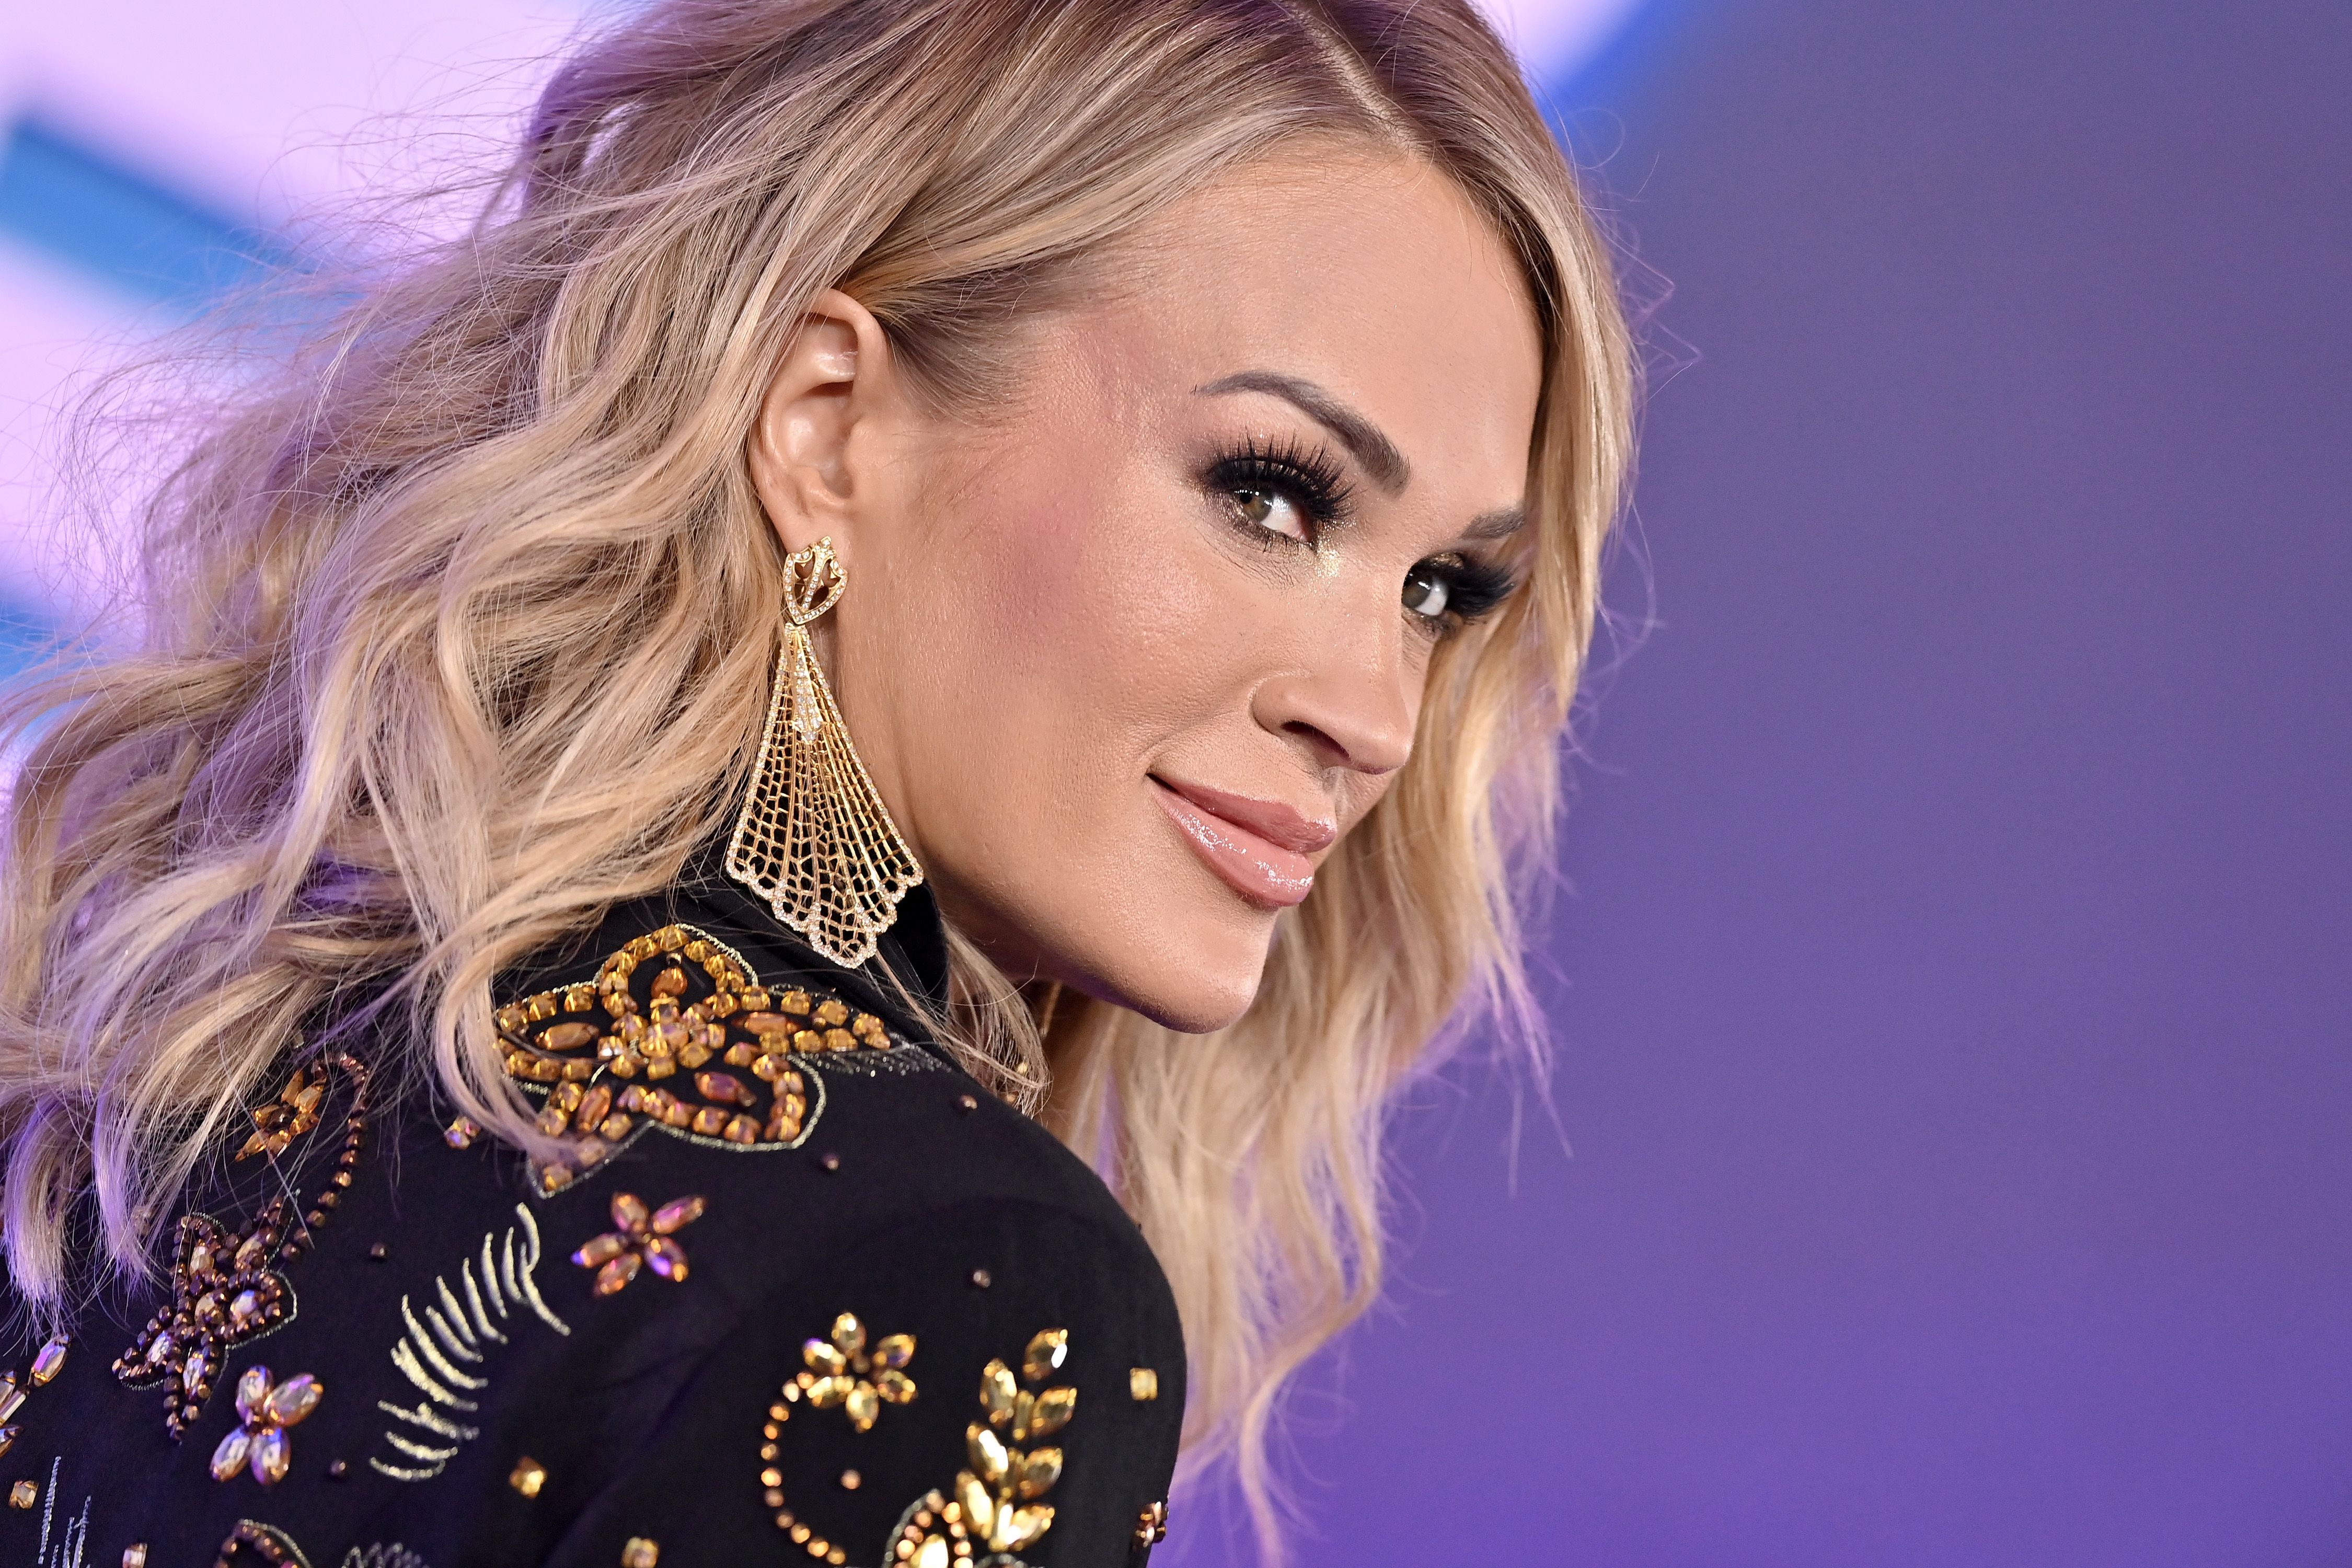 Carrie Underwood Announces New Tour Dates to Mix Reaction From Fans